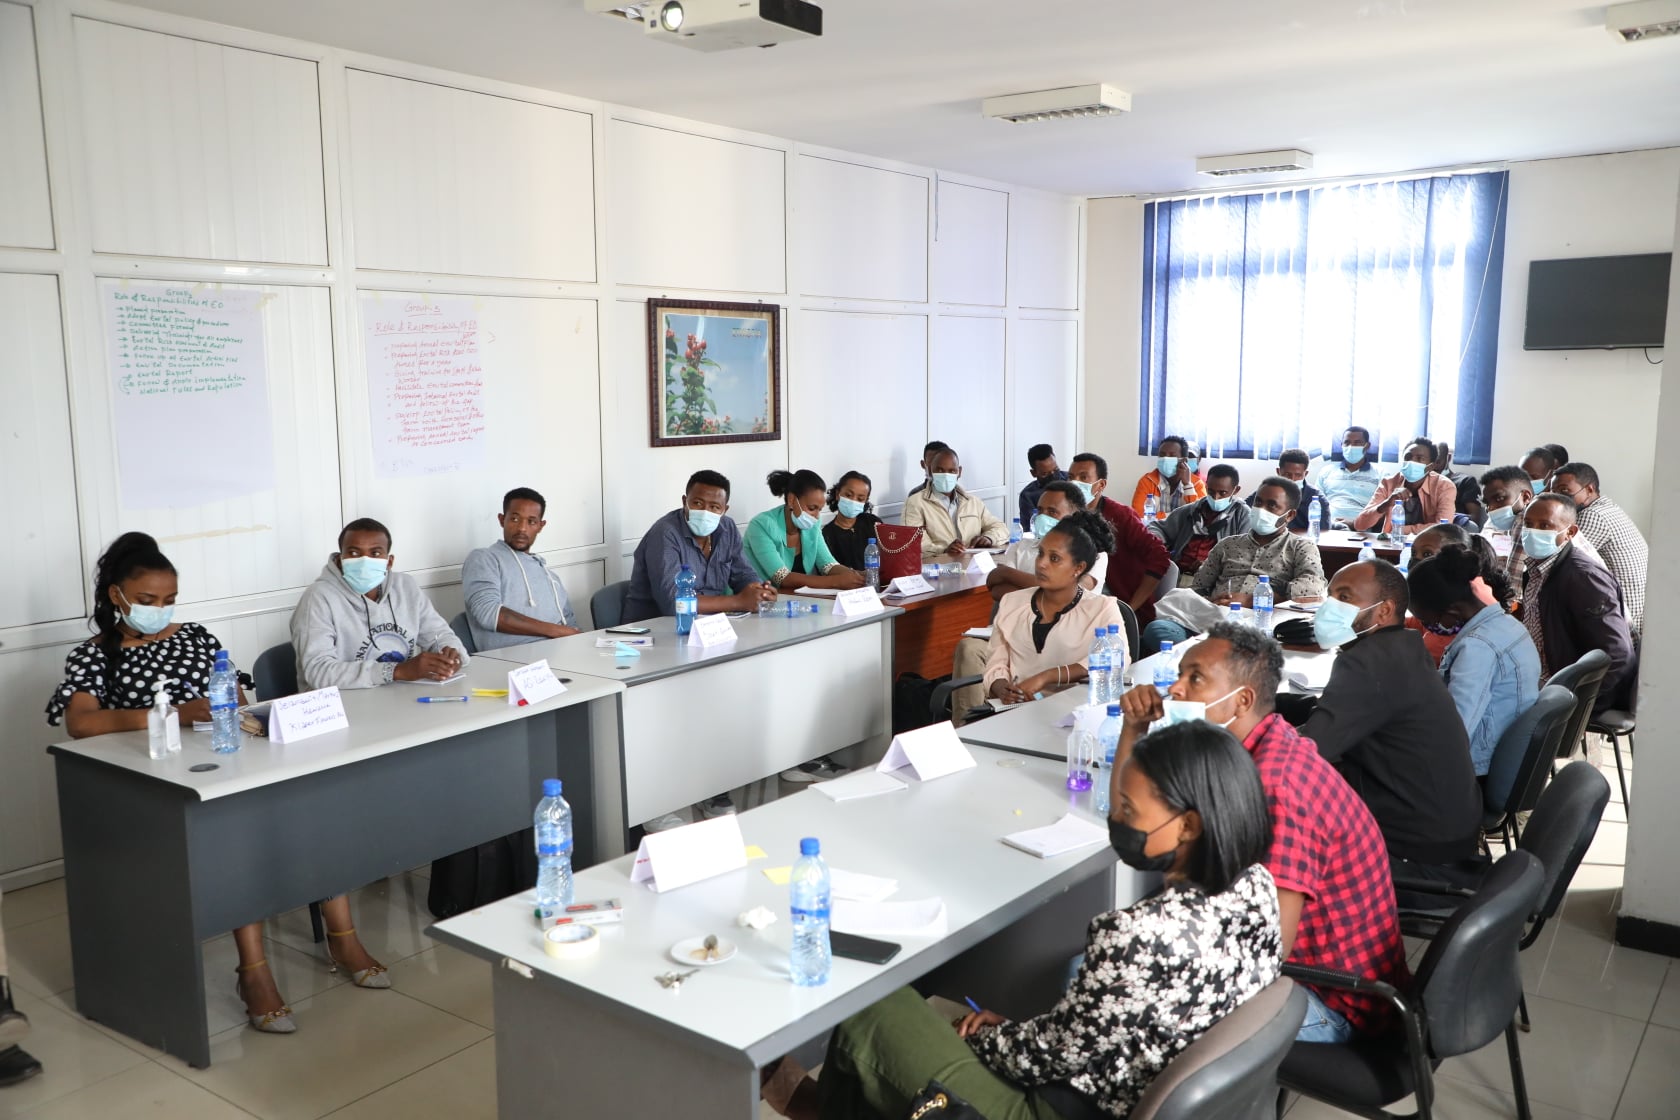 EHPEA TVET Center delivered training for farm environment officers on “Environment Management and Risk Assessment”